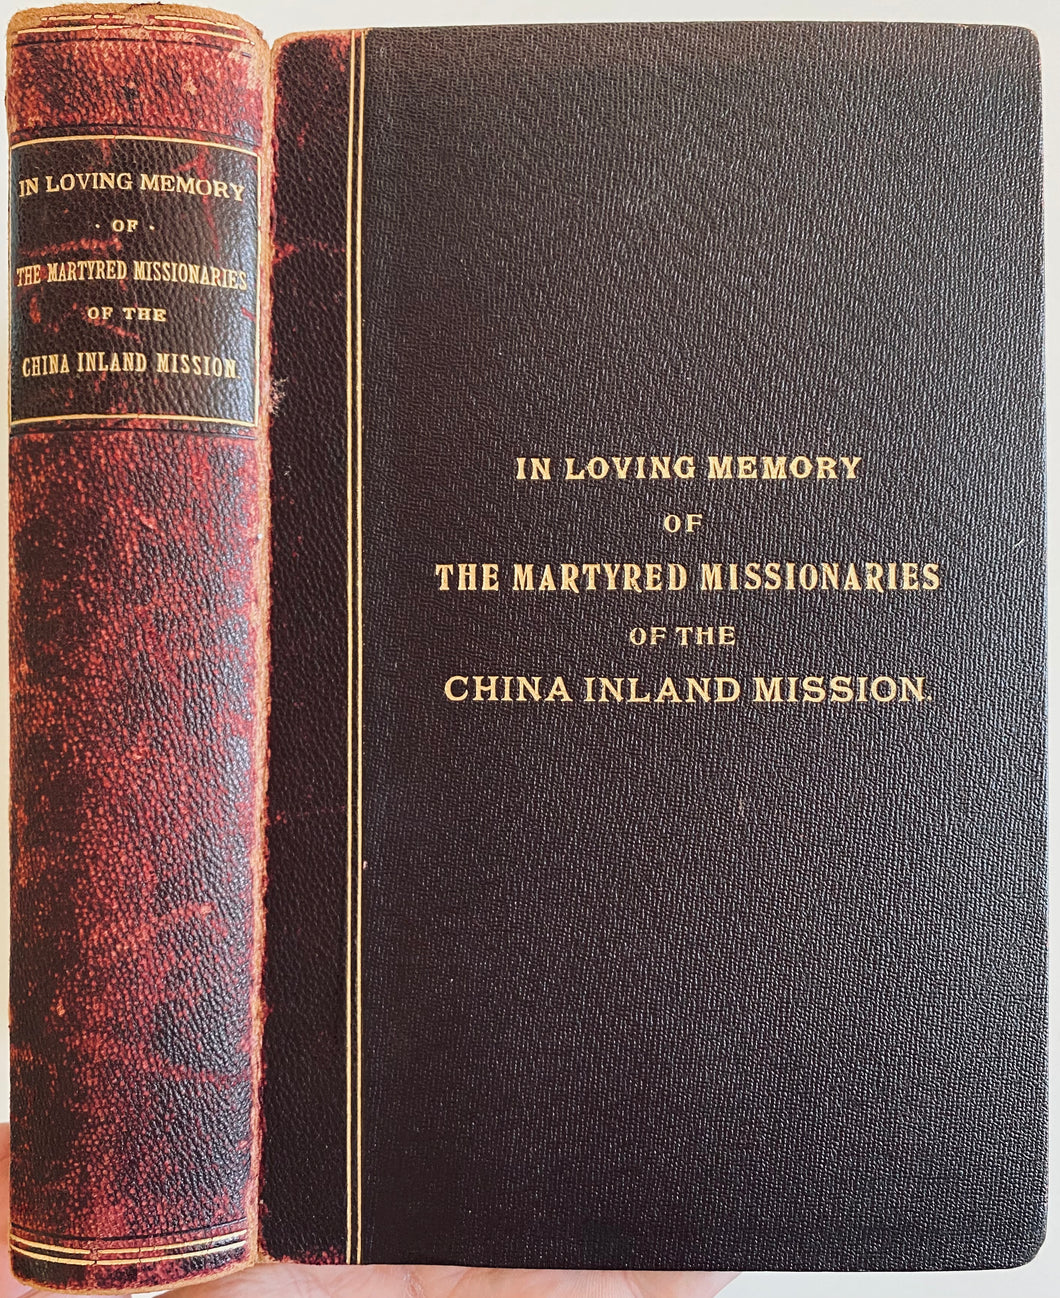 1901 MARSHALL BROOMHALL. Martyred Missionaries of the China Inland Mission - Presentation Edition.